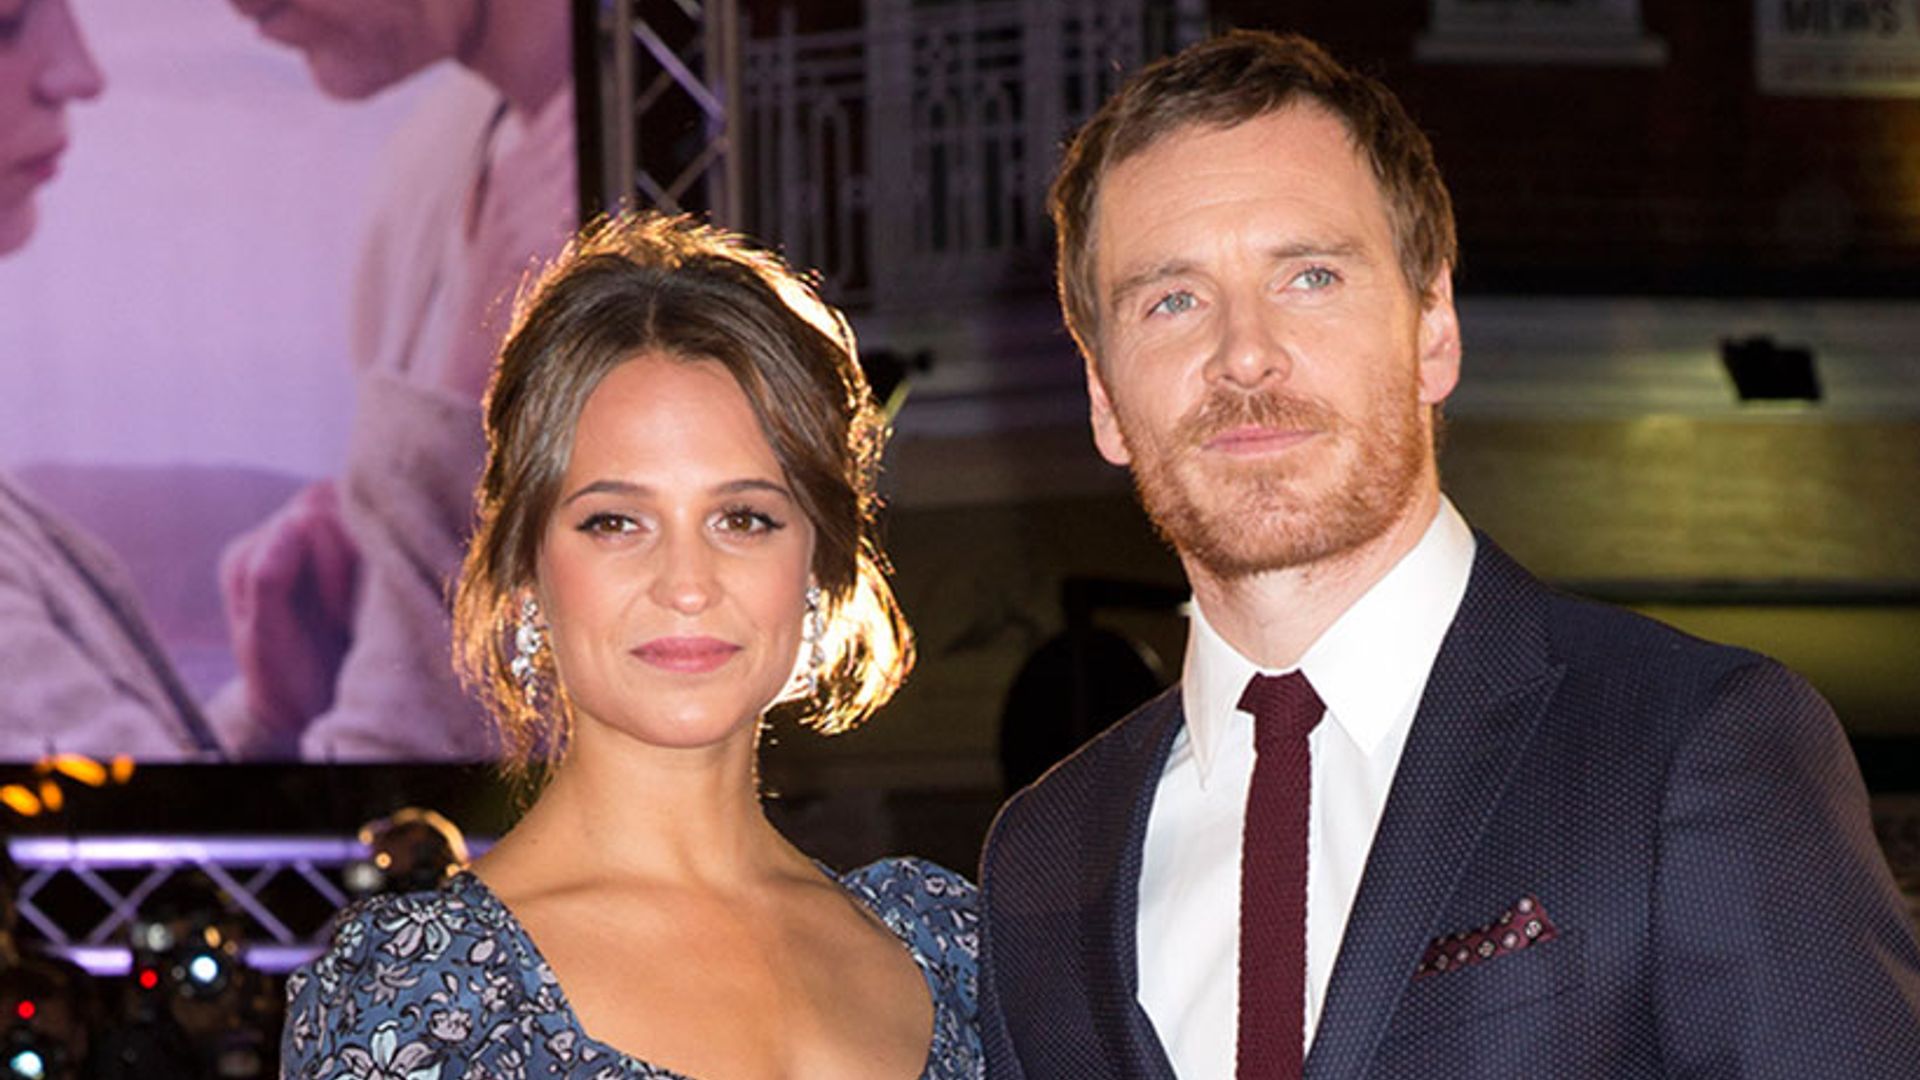 Michael Fassbender opens up about his relationship with girlfriend Alicia Vikander: 'I'm glad it happened'